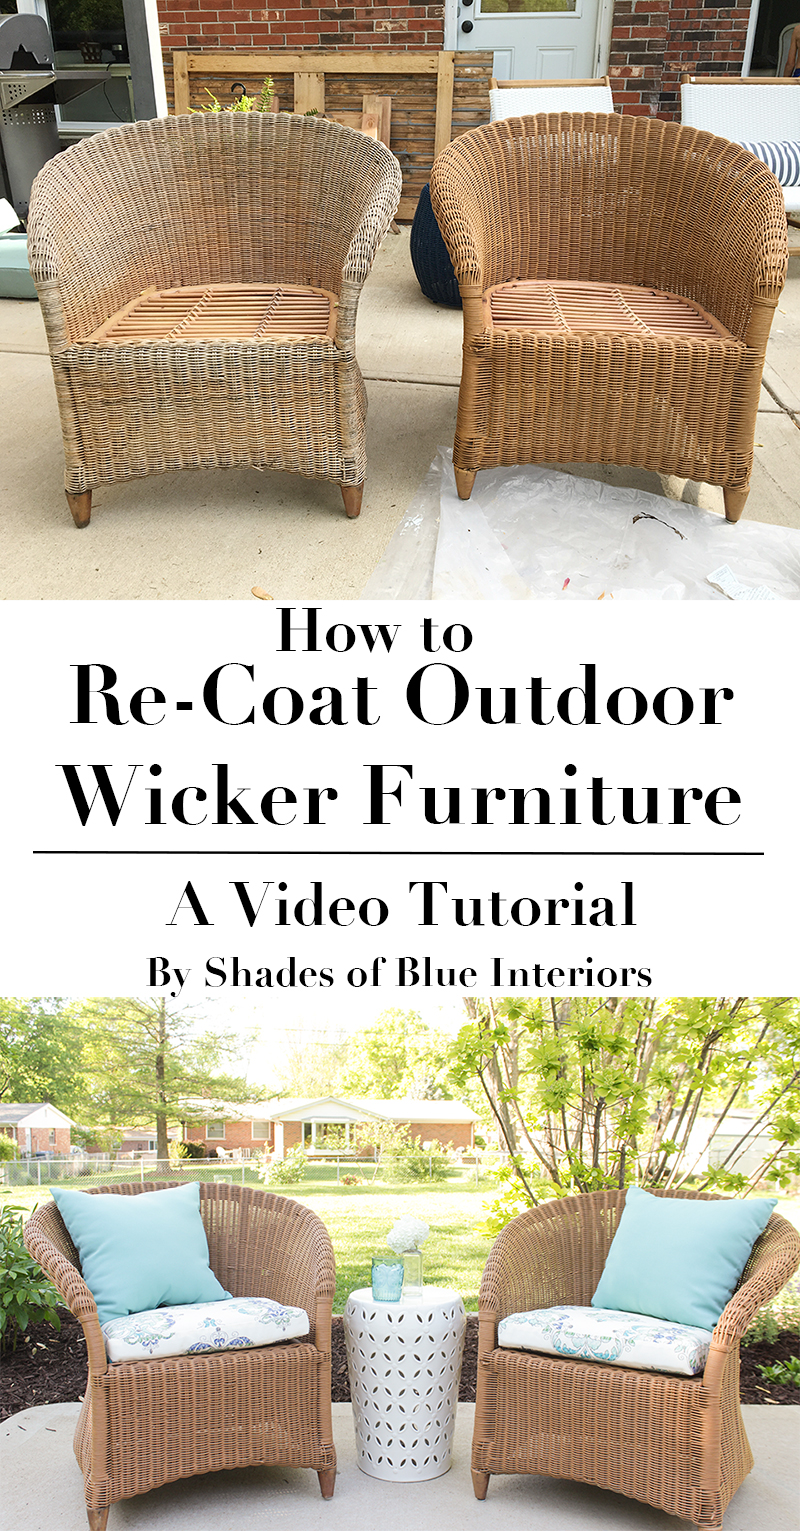 How To Fix Plastic Wicker Furniture How to Re-Coat Wicker Furniture - Shades of Blue Interiors